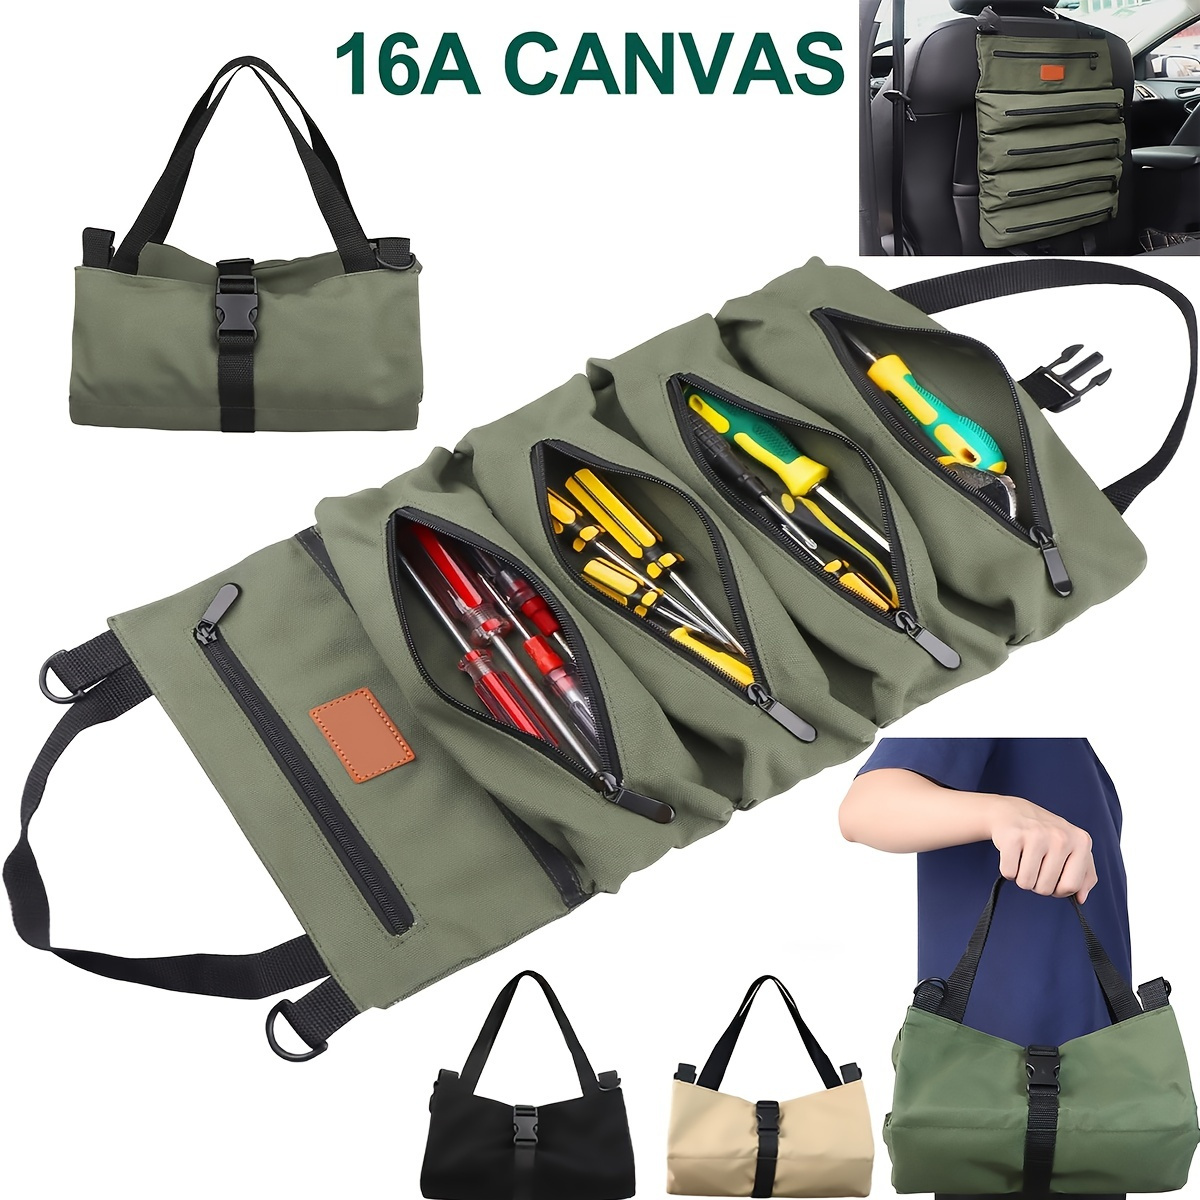 Tool Bag, Roll Up Bag, Portable Heavy Duty Tool Organizer For Men Women,  Portable Bag With 2 Detachable Pouch, Green Storage Box, Gifts For Dad